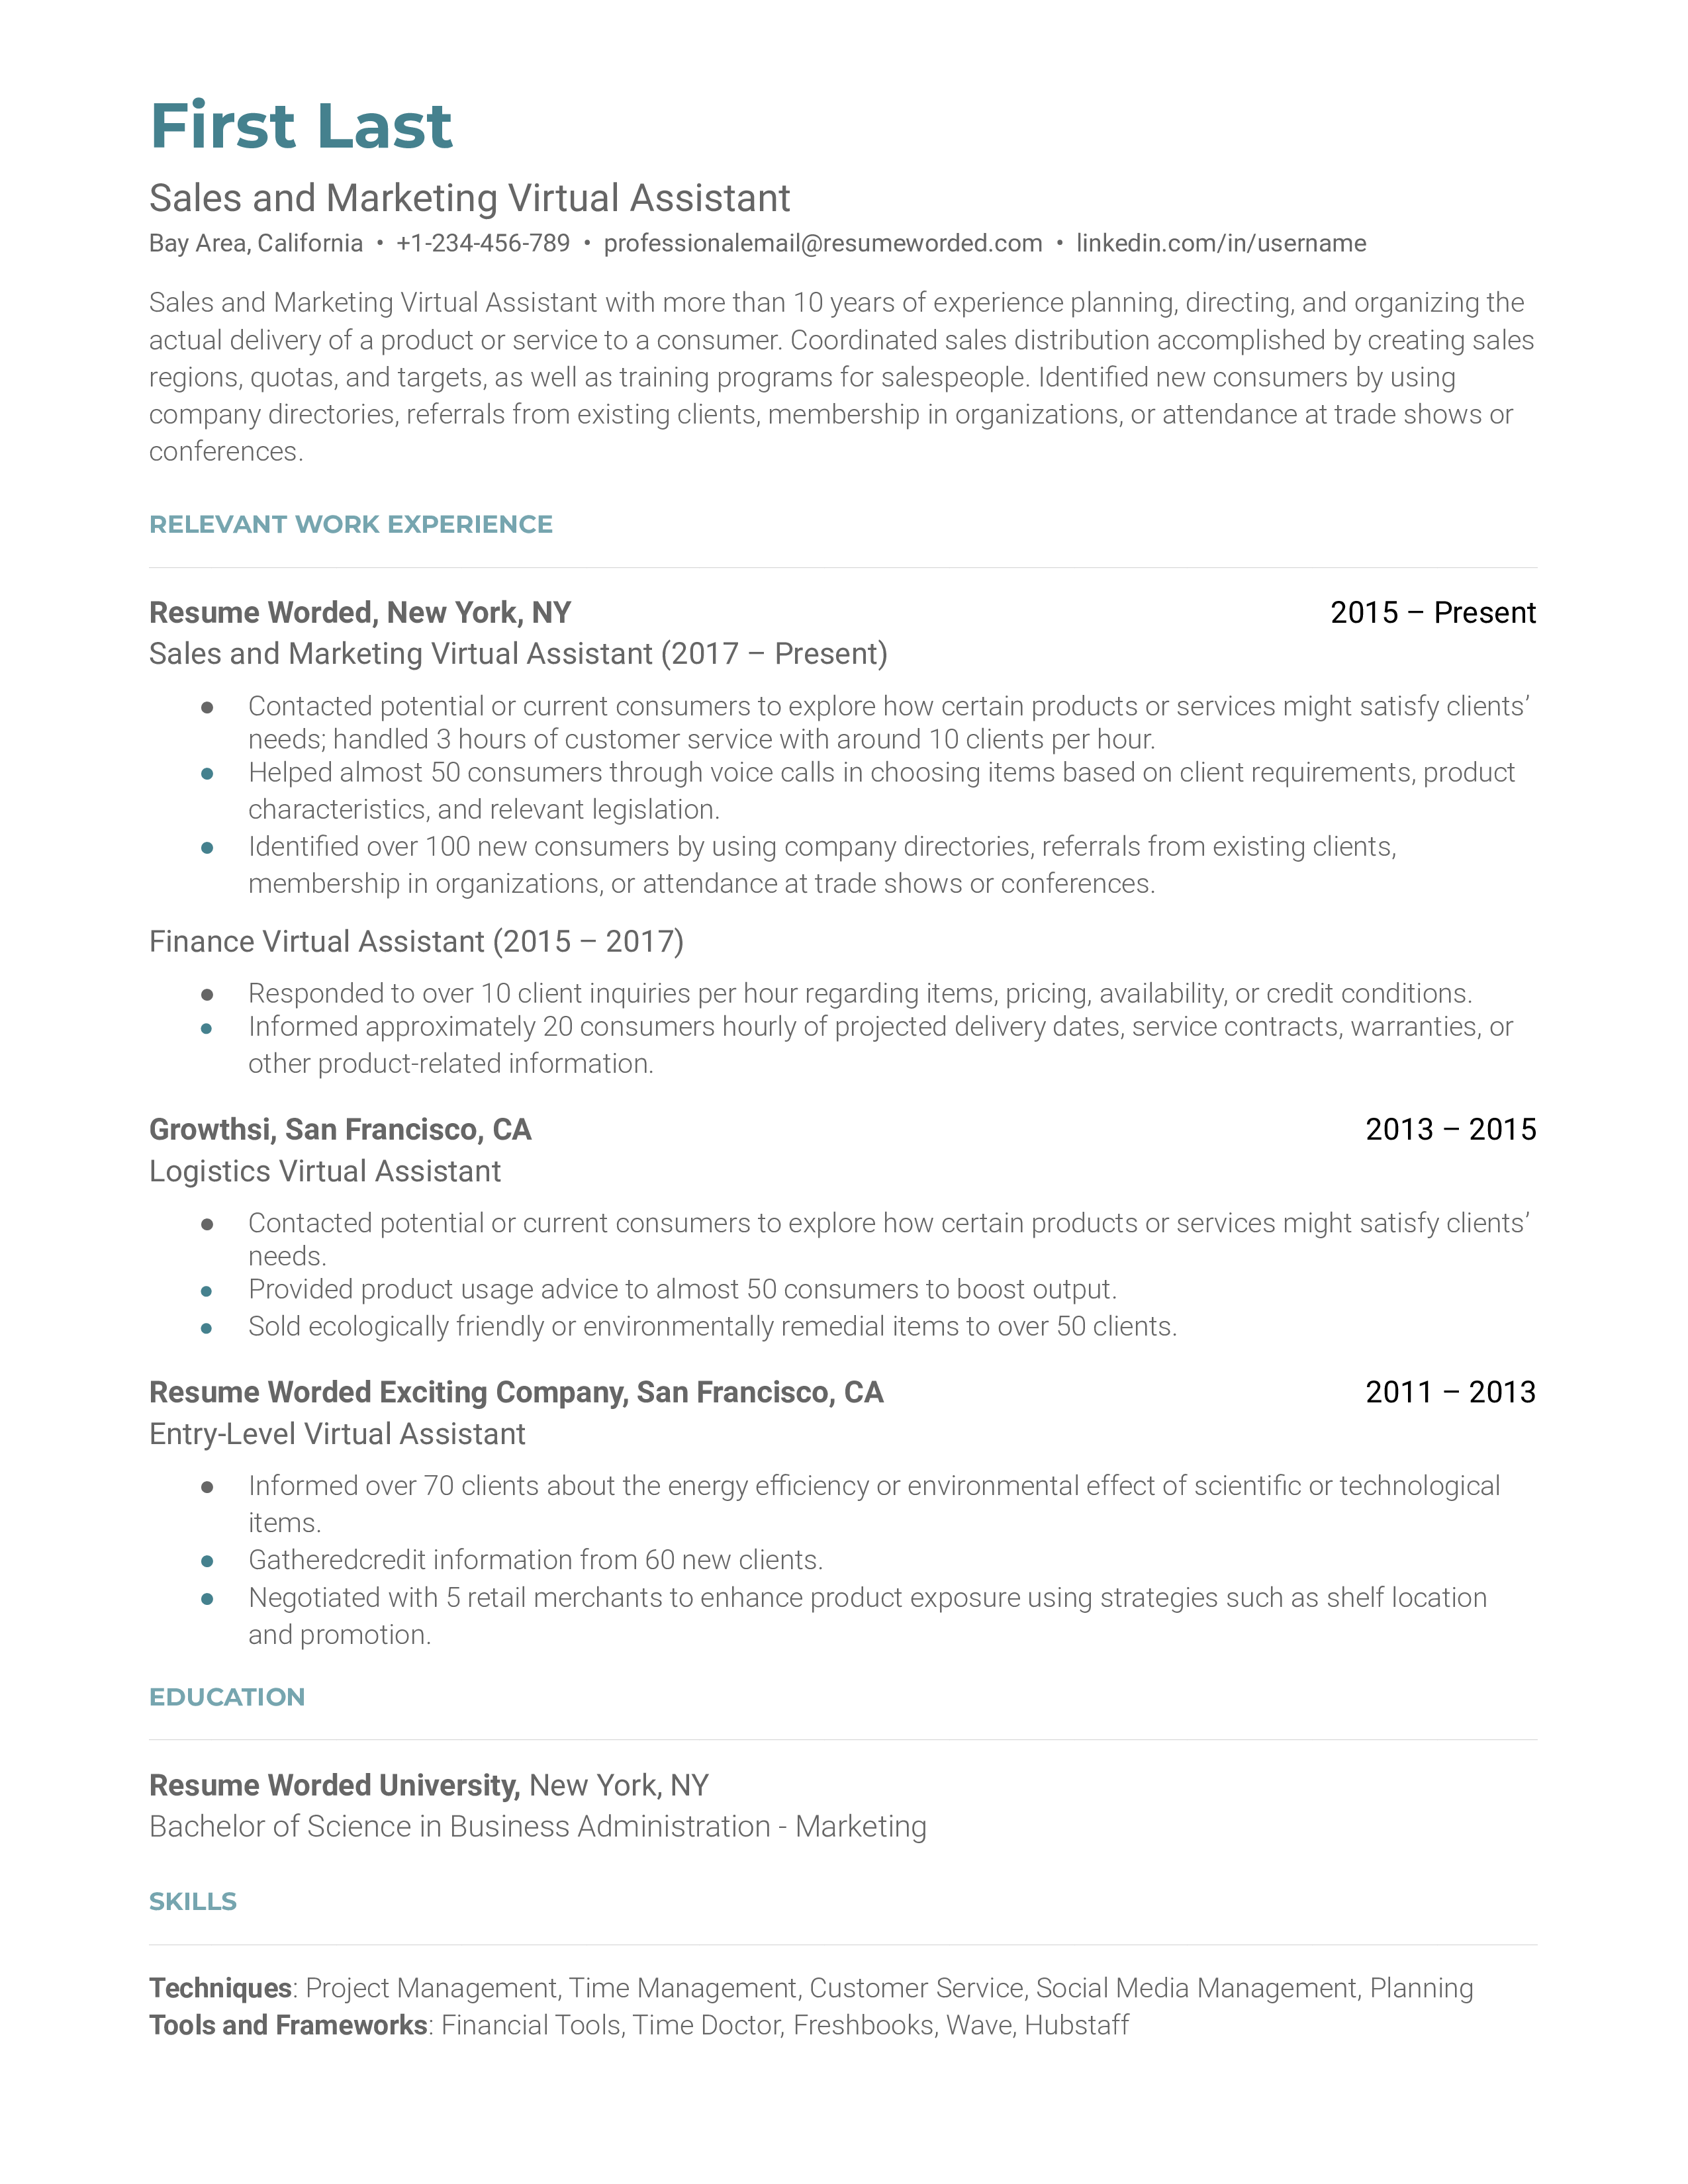 Sales and Marketing Virtual Assistant Resume Sample